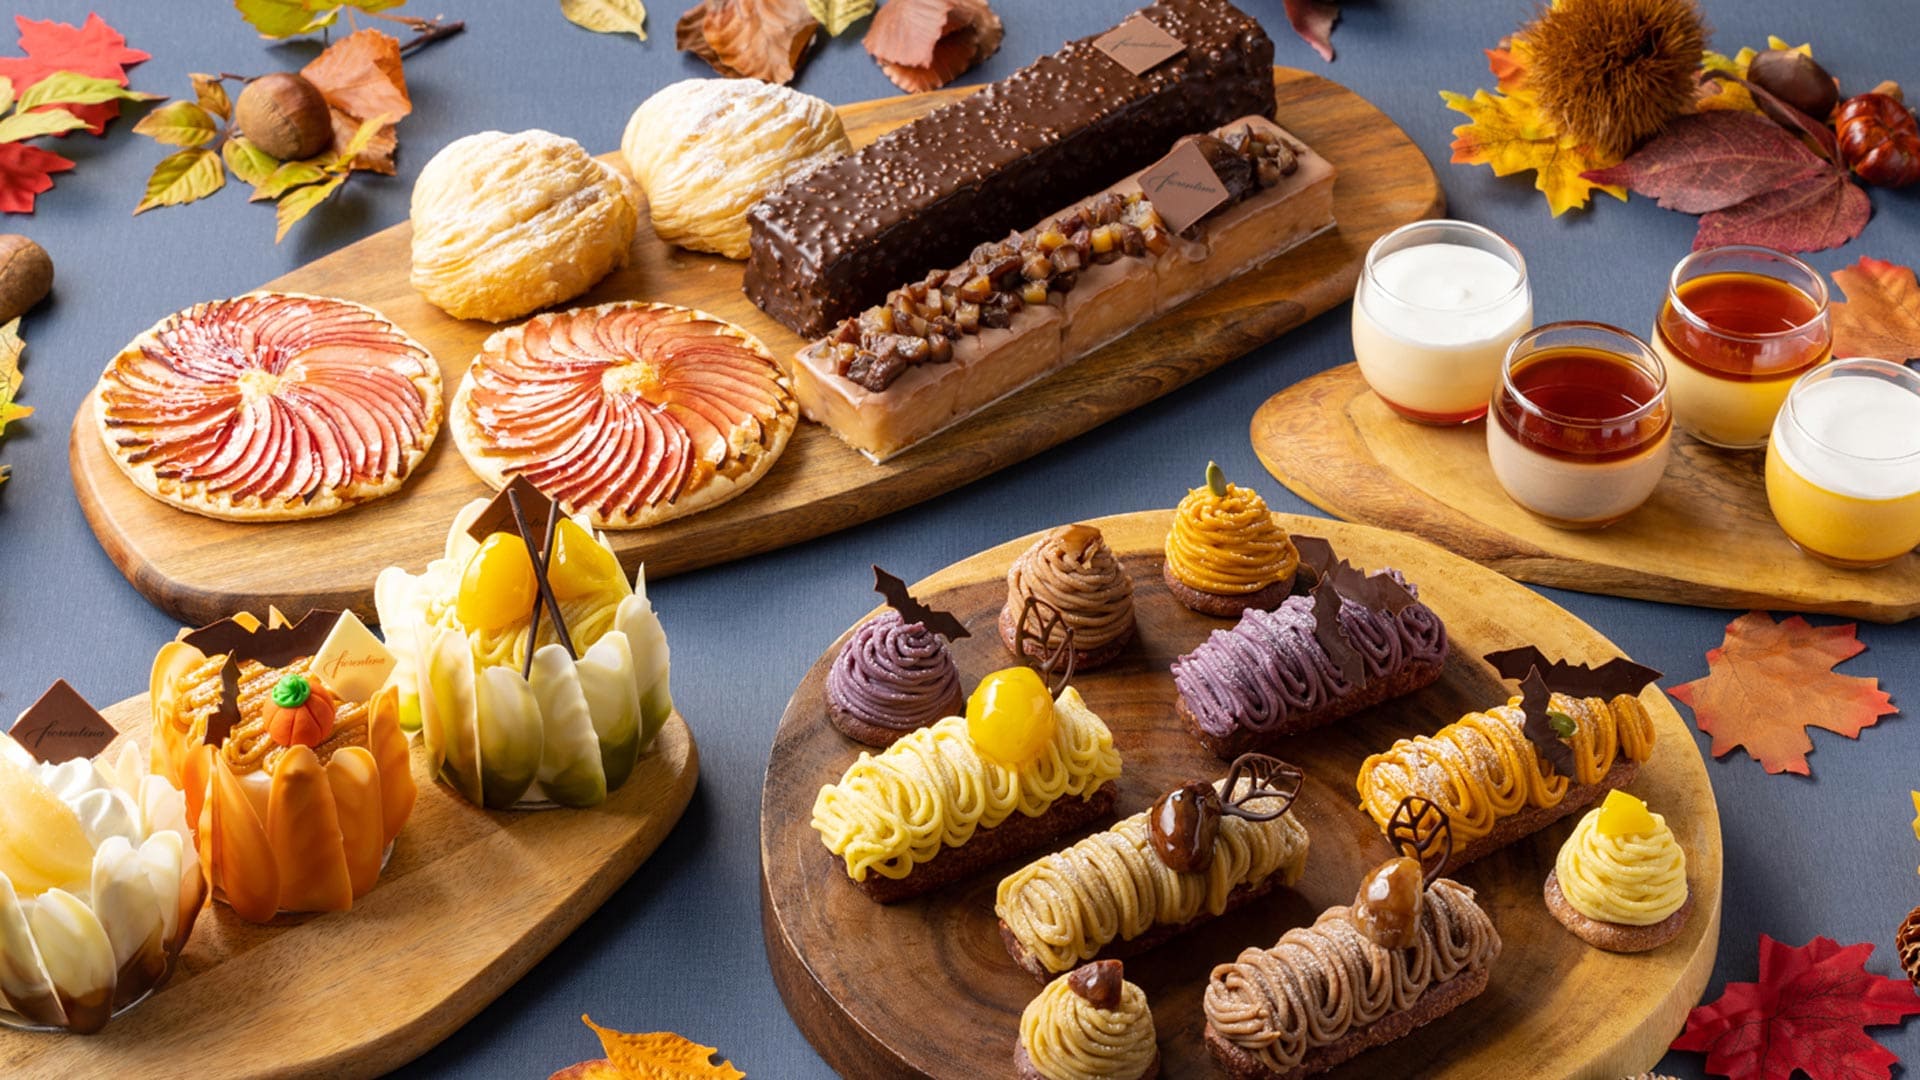 Autunno Dolce – Fall Desserts and Breads